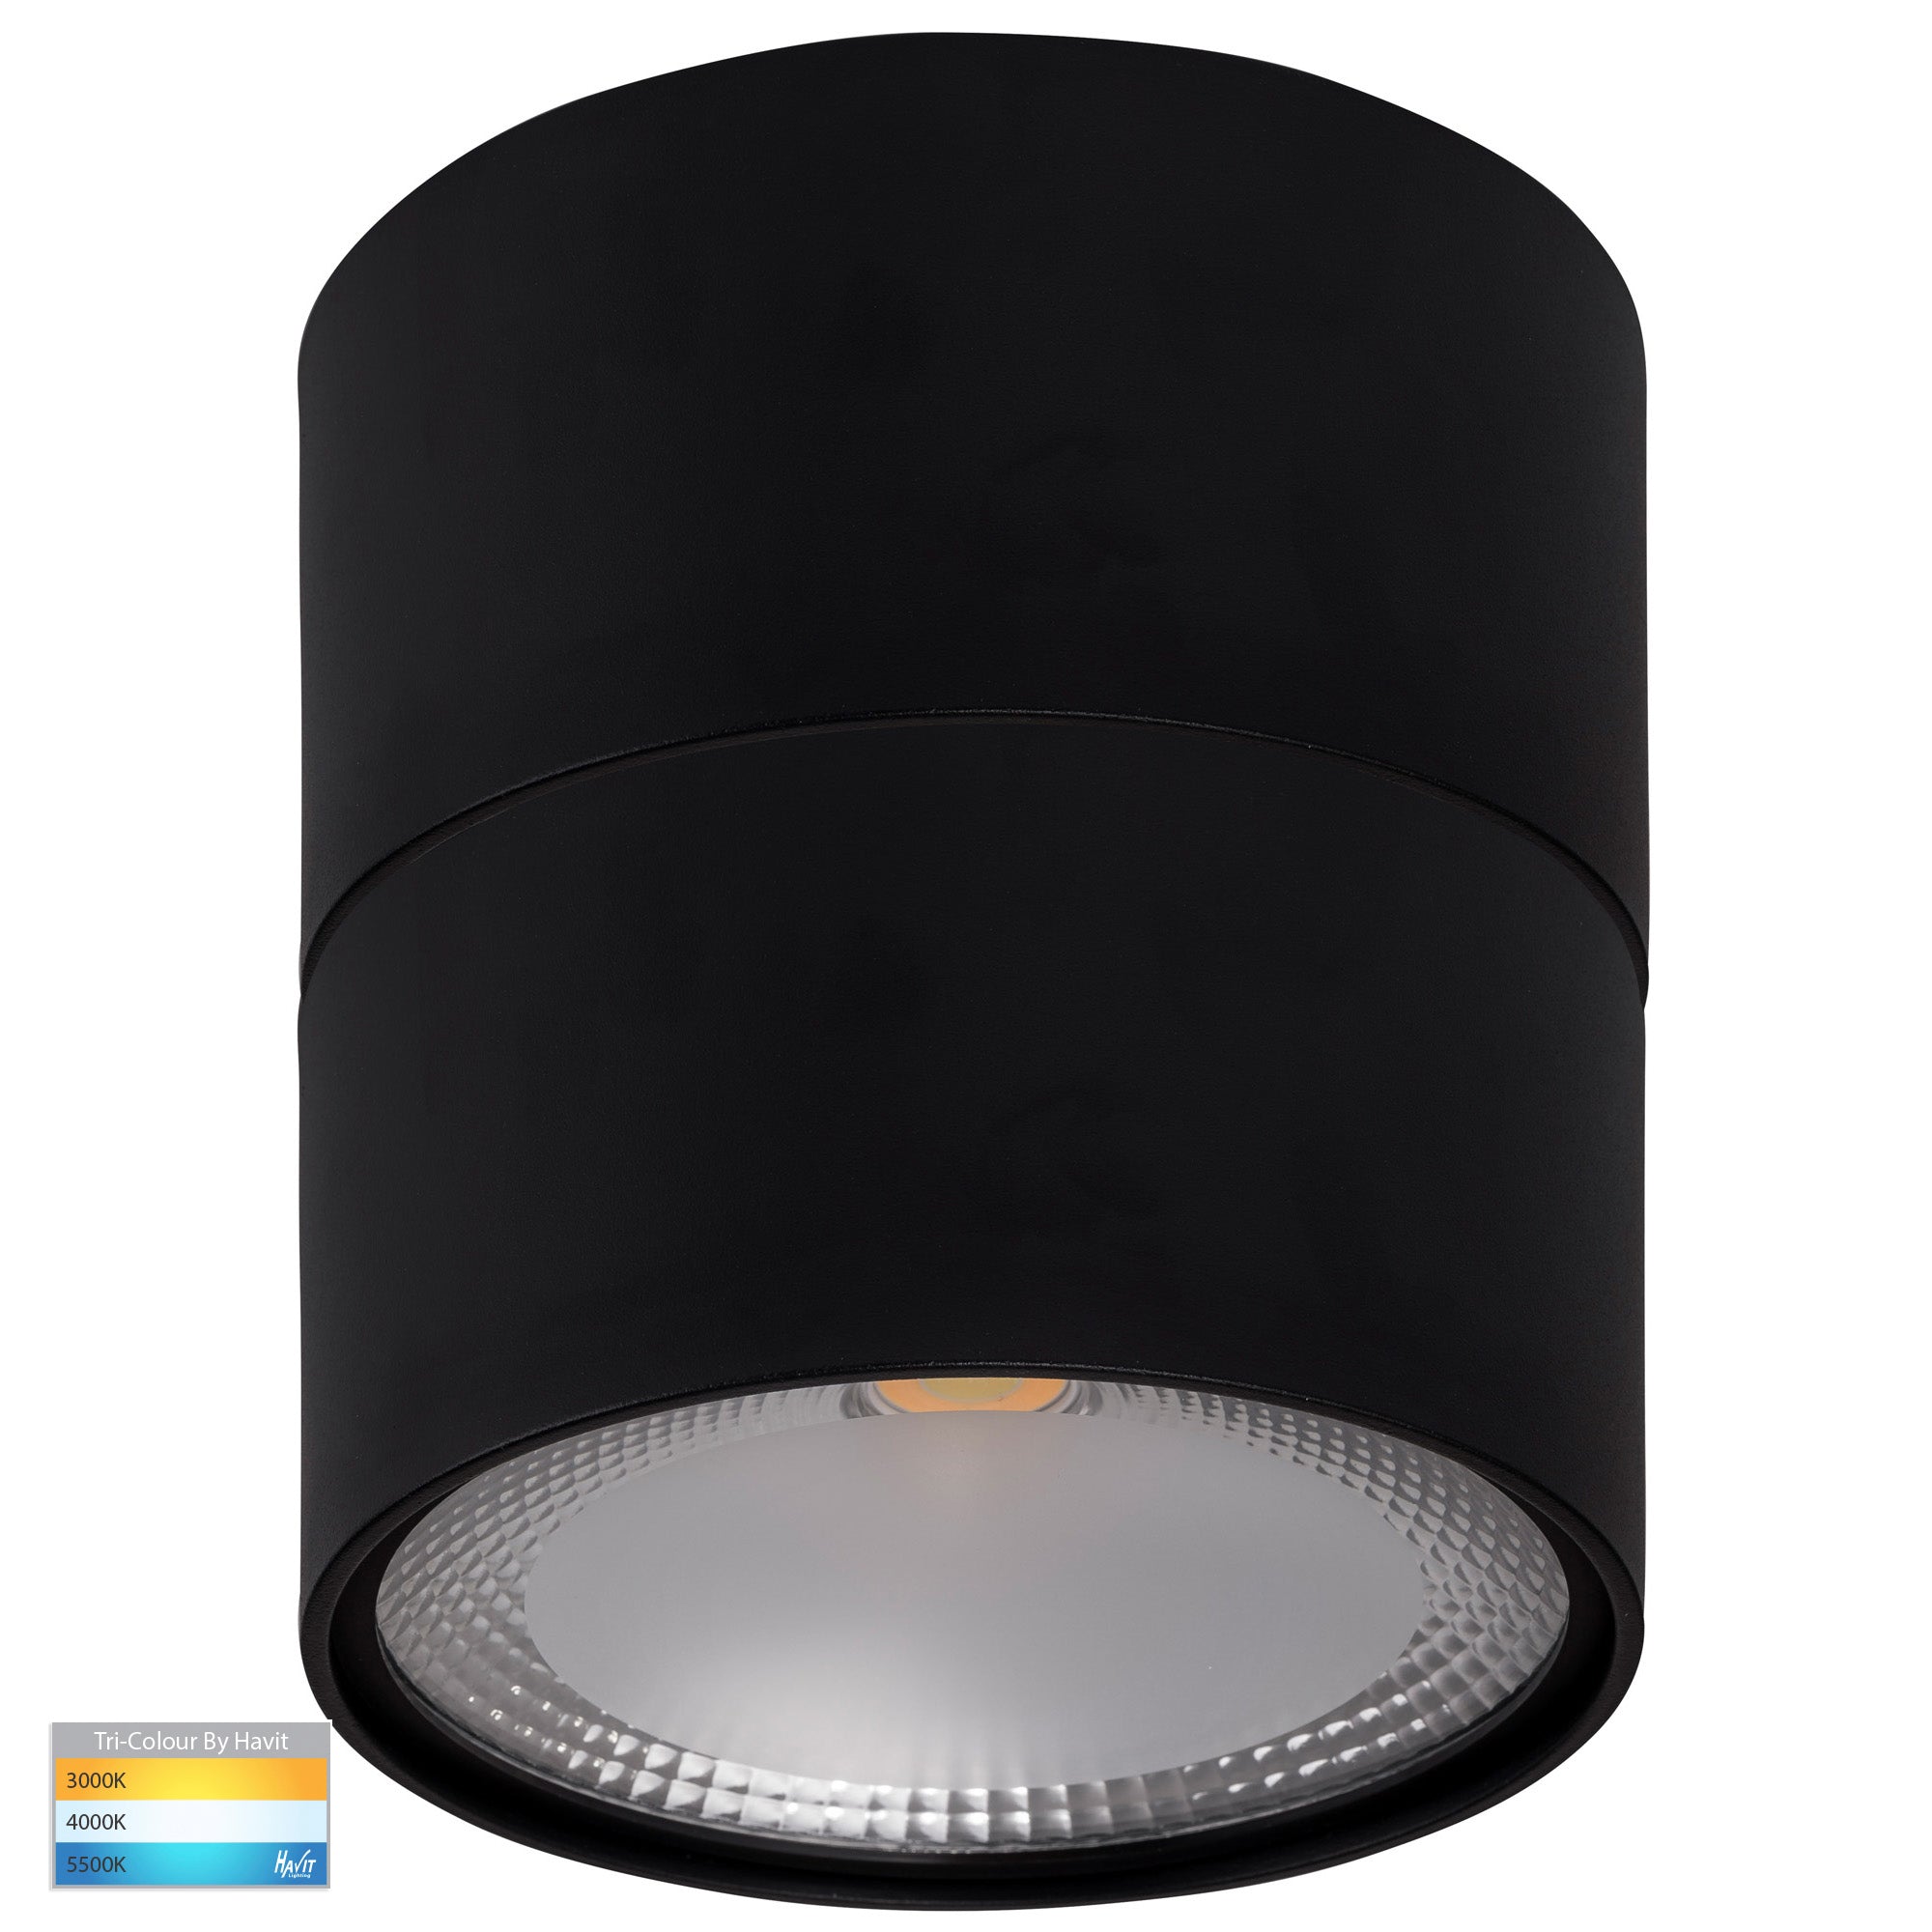 HV5805T-BLK-EXT | HV5805T-BLK-EXT-12V - Nella Black 18w Surface Mounted LED Downlight with Extension